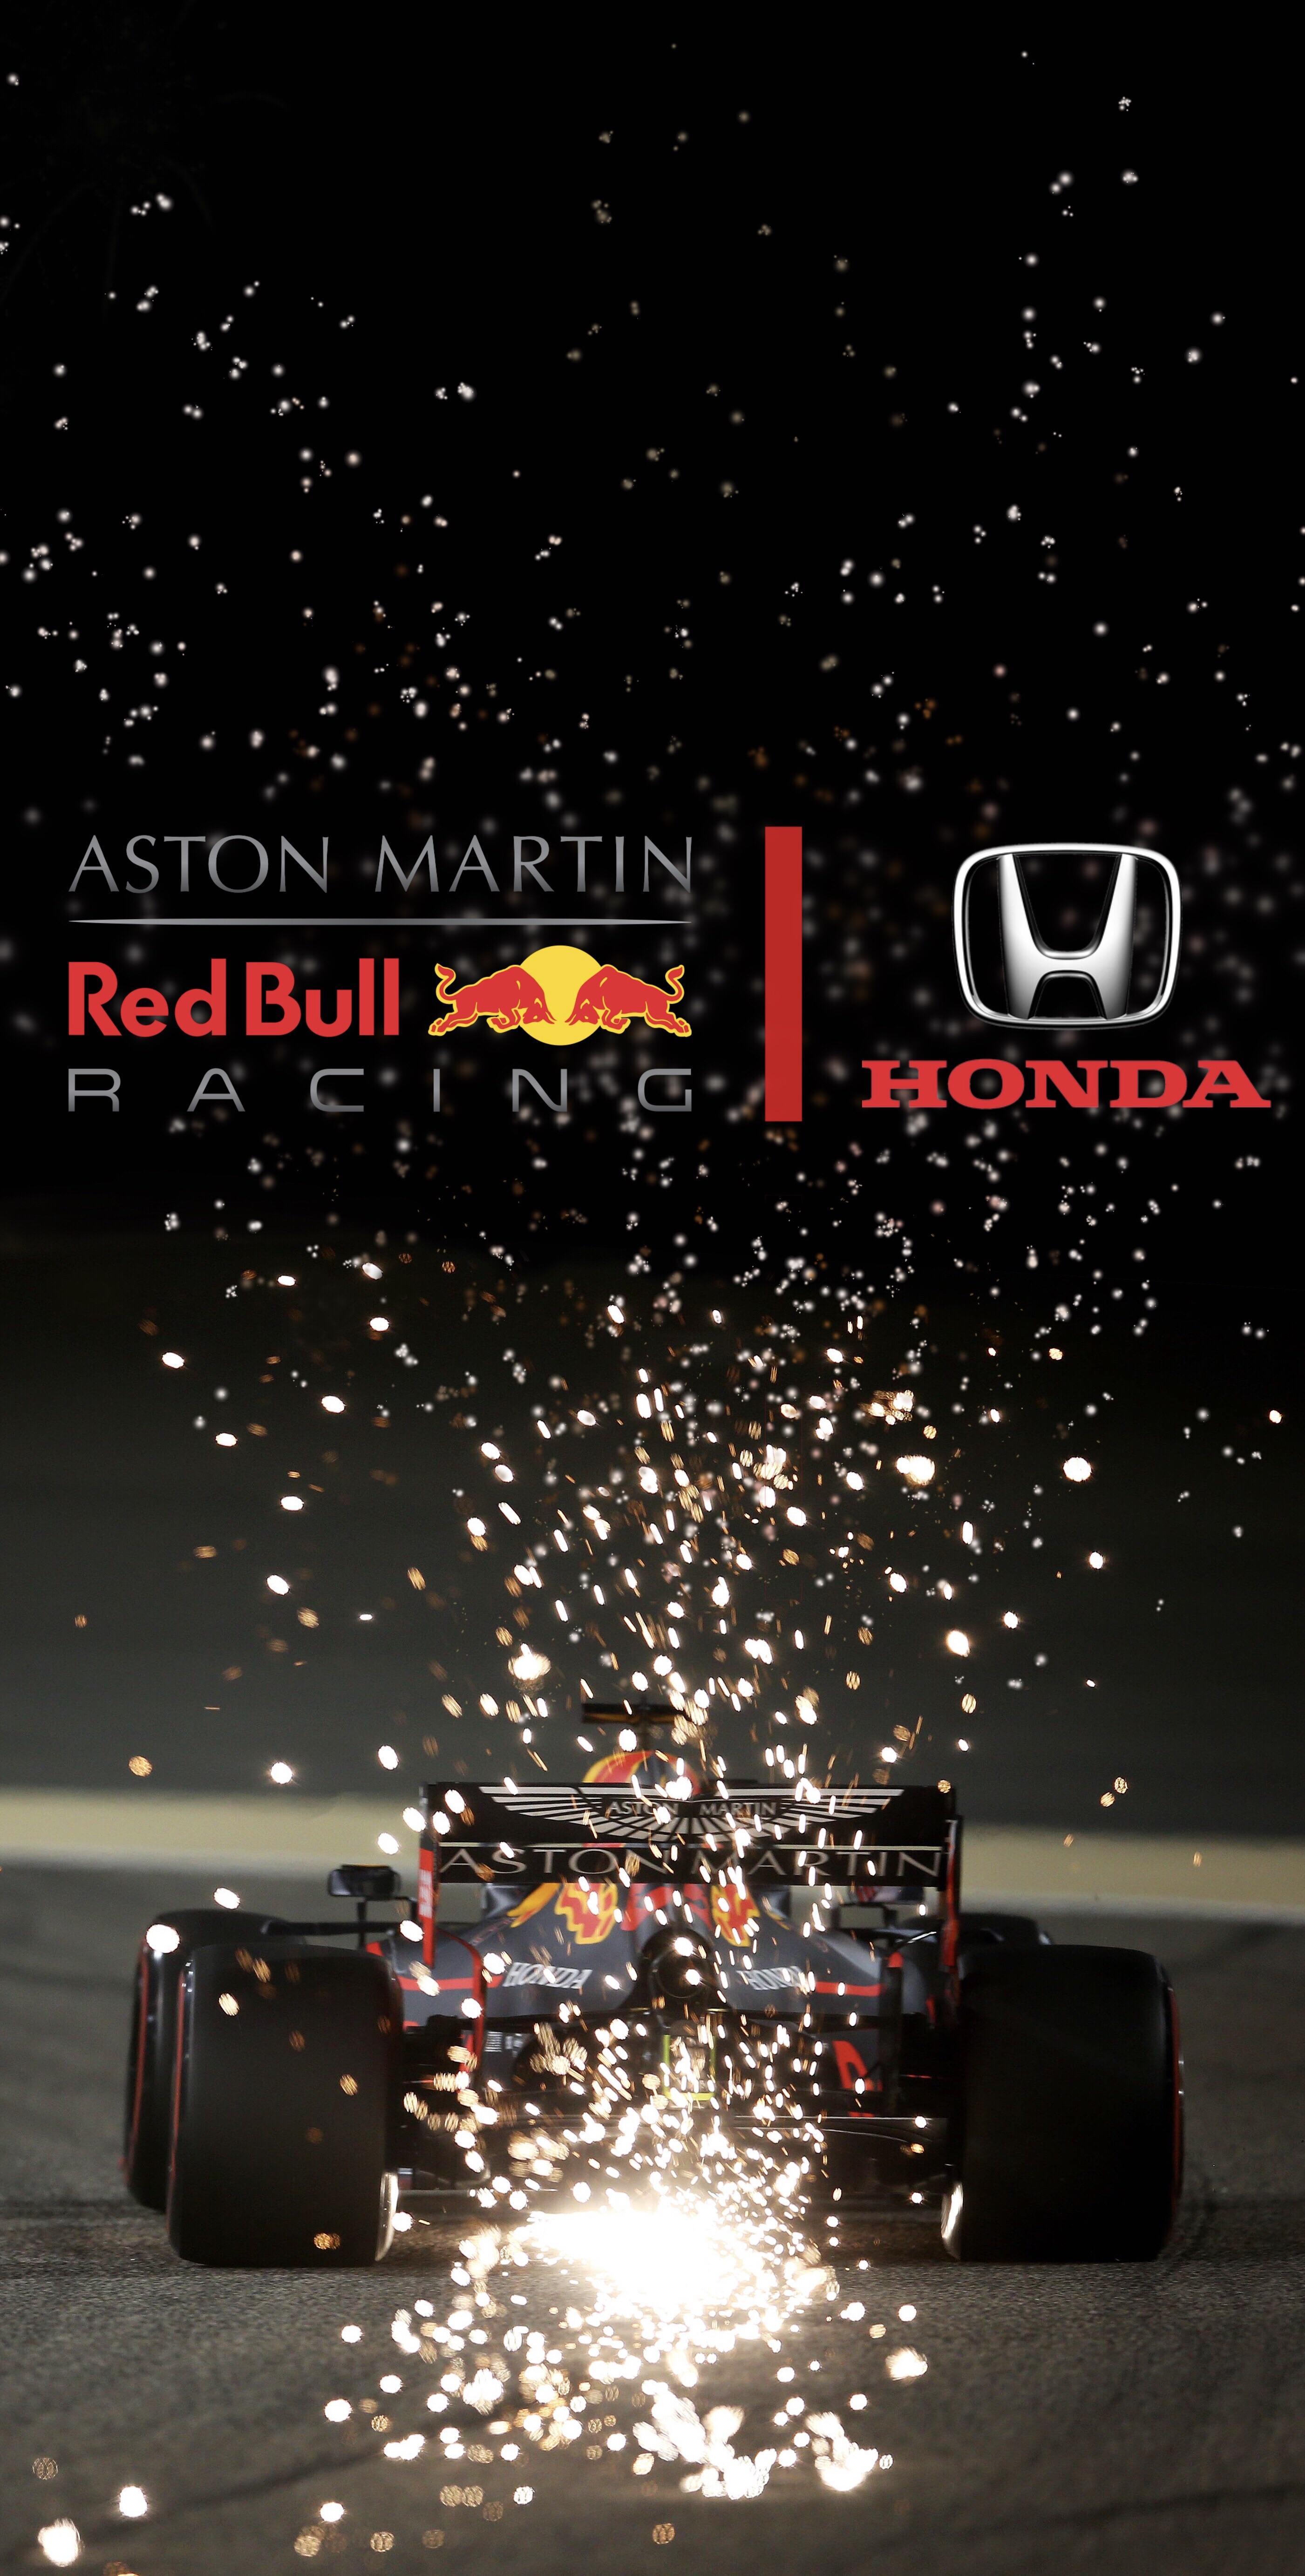 Aston Martin Red Bull IPhone X Wallpaper I Just Made. Figured